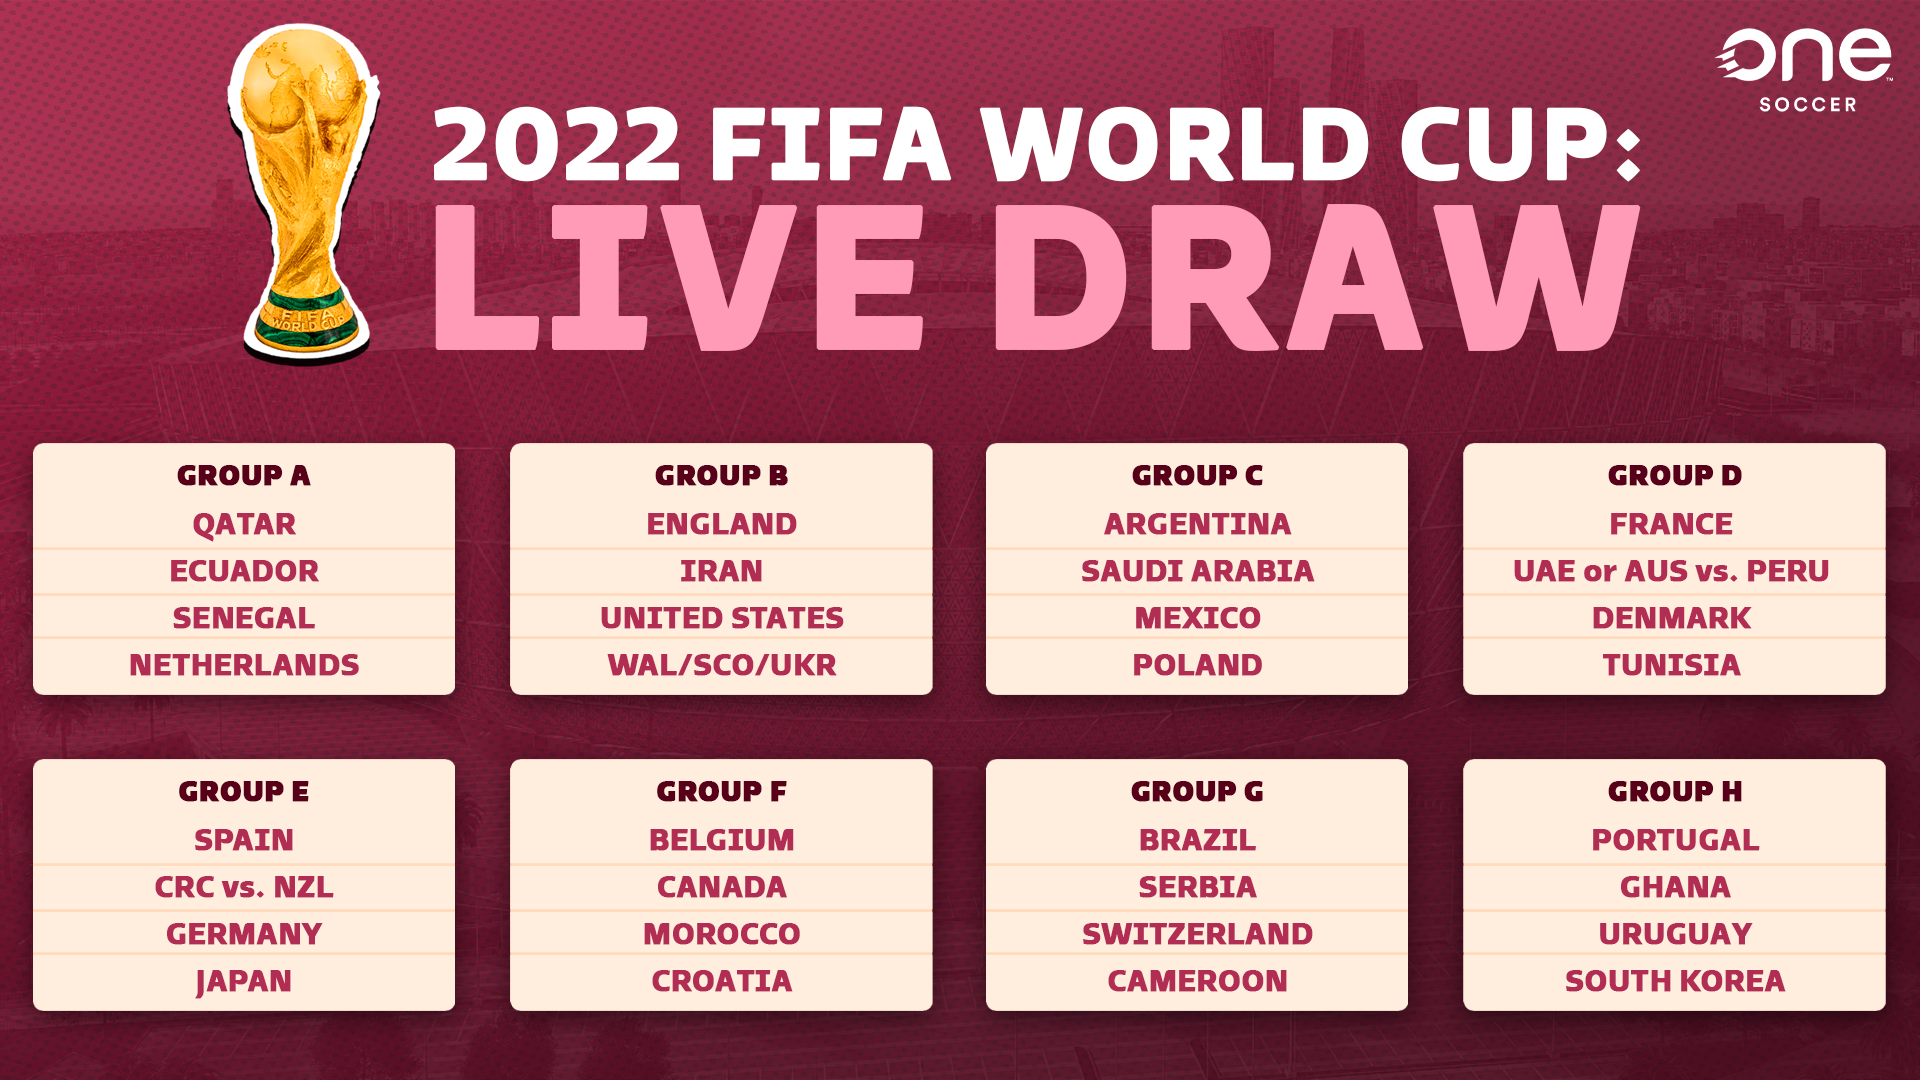 Canada drawn into Group F in 2022 World Cup, facing Belgium, Croatia, and Morocco